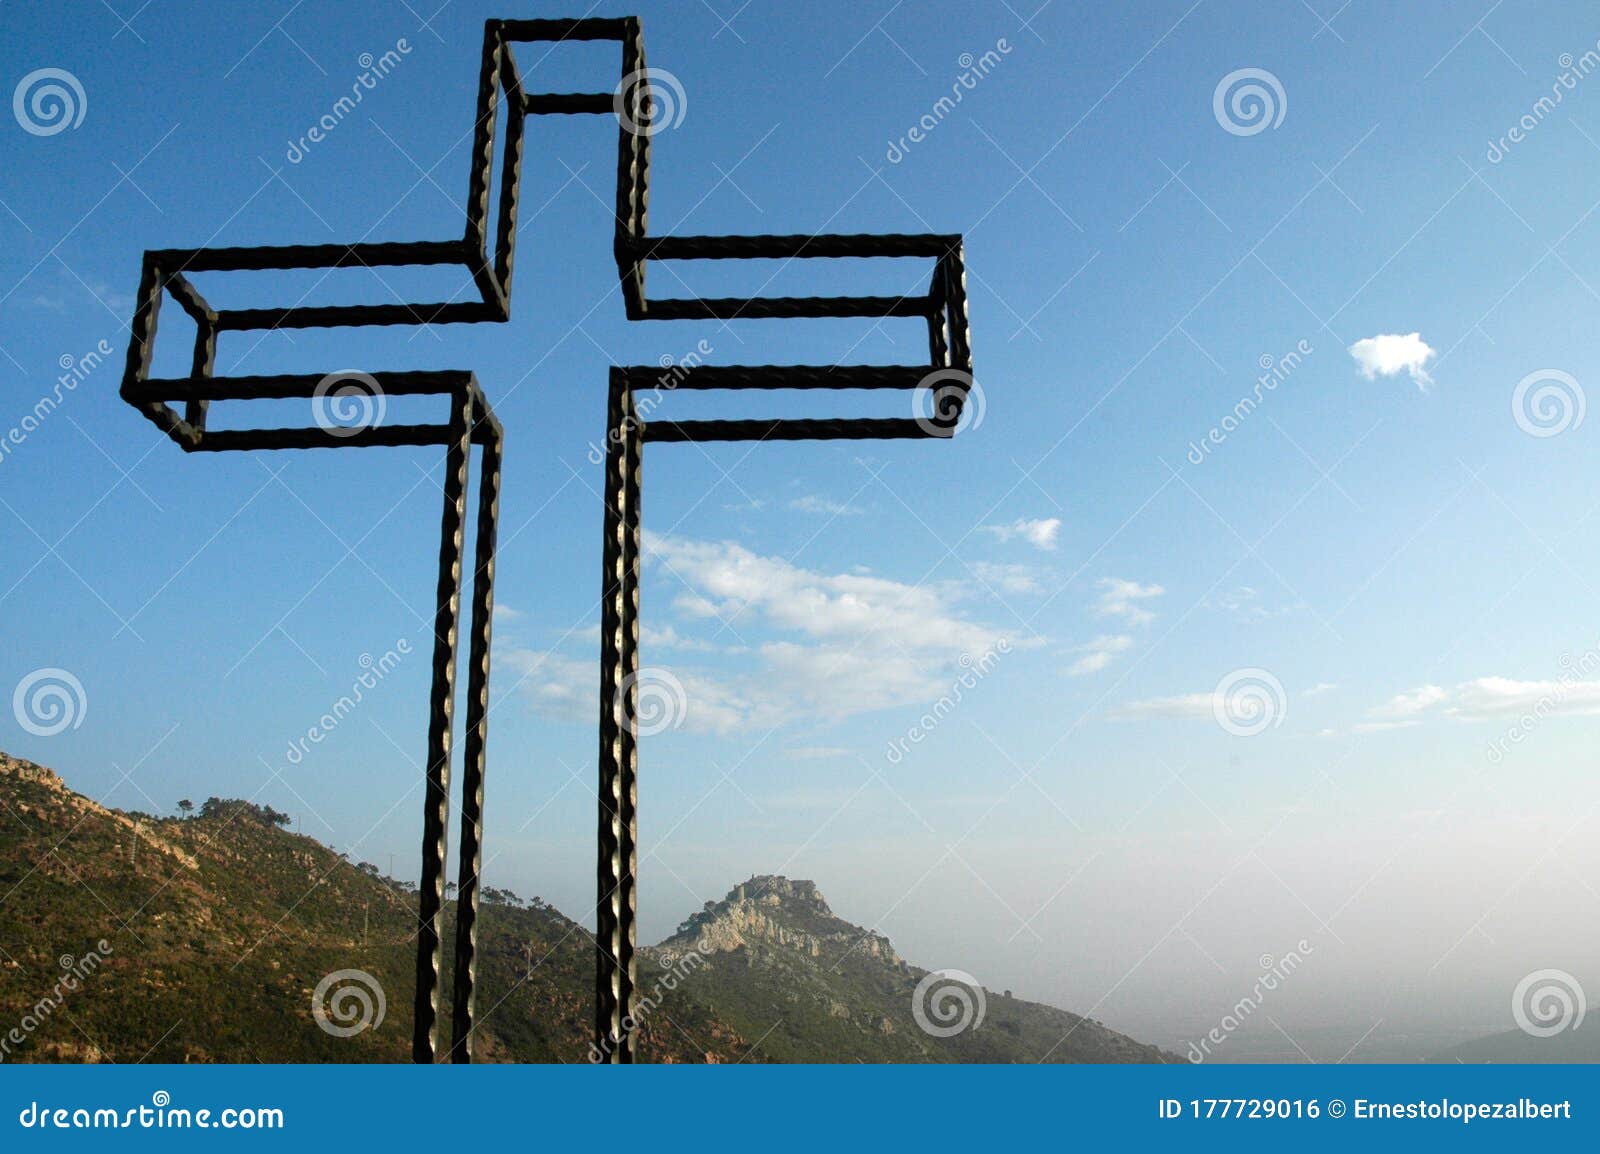 metal cross of the viewpoint of the desert of palms